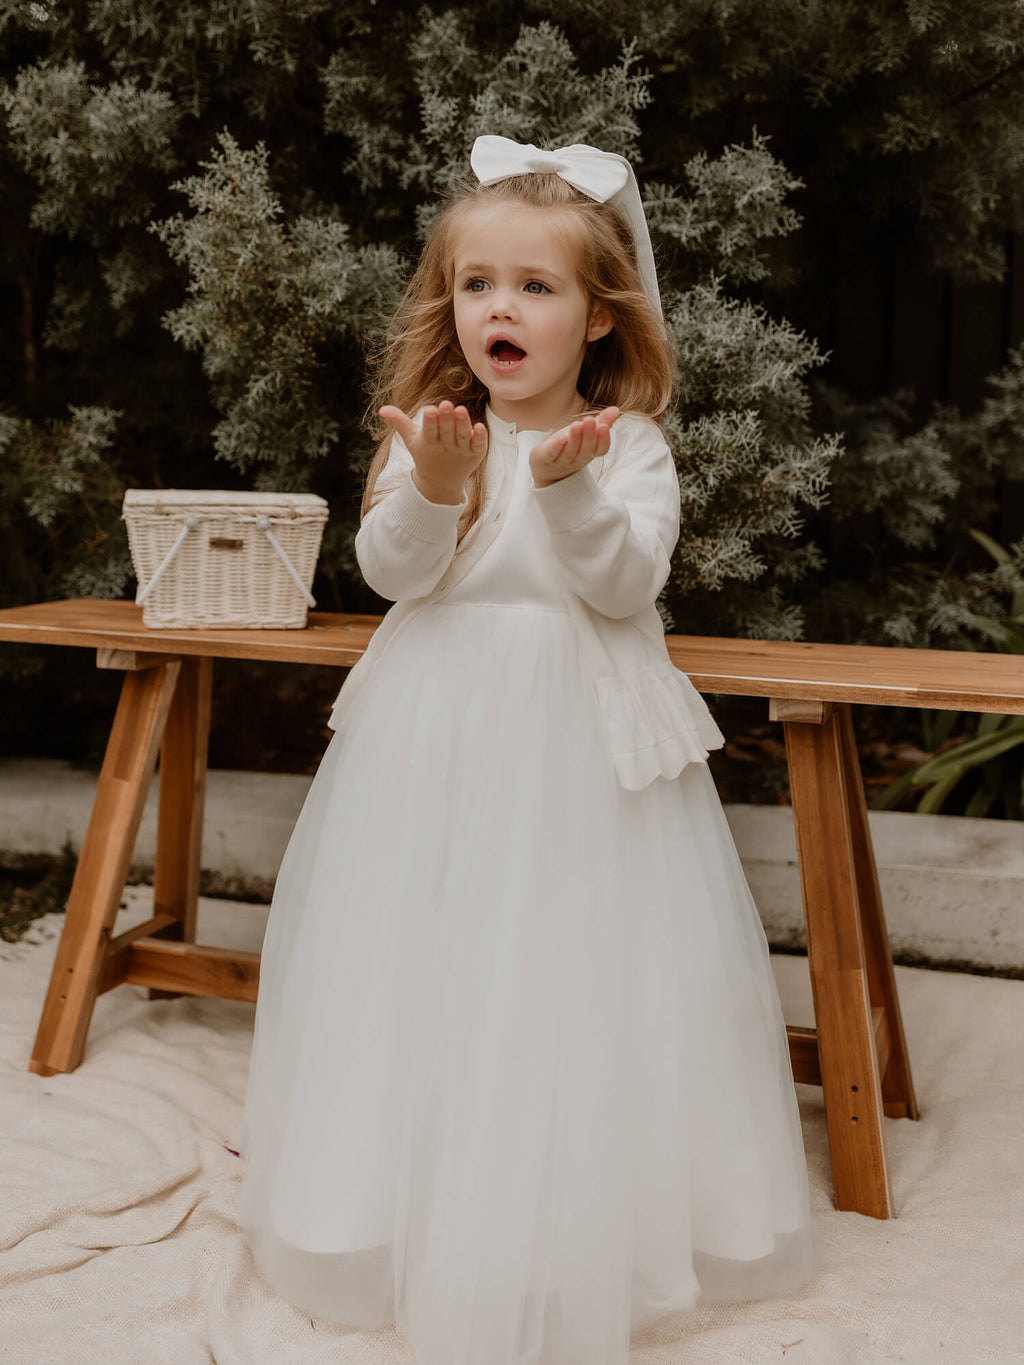 Chloe embroidered flower girl cardigan is worn by a toddler. She wears a tulle flower girl dress and our Adeline satin bow in her hair.